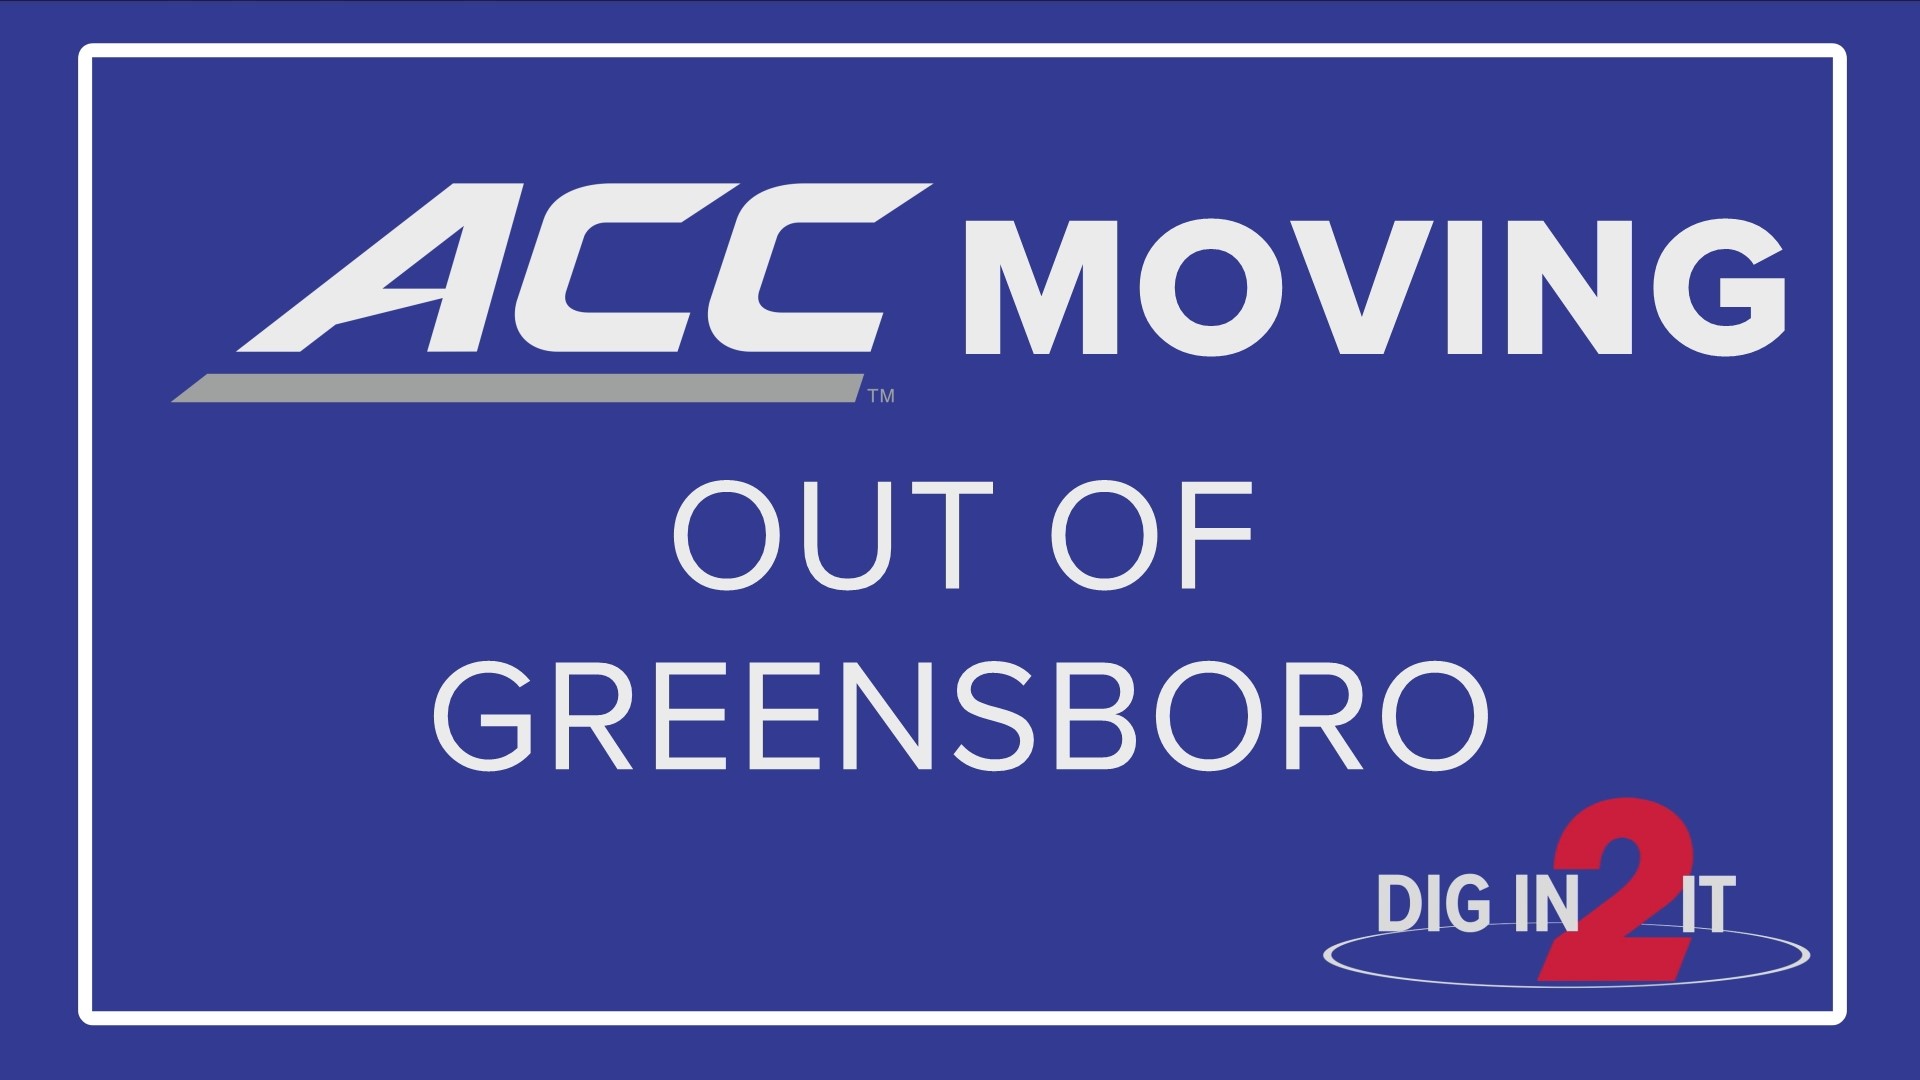 The ACC says it will move it’s headquarters to another North Carolina city – Charlotte.